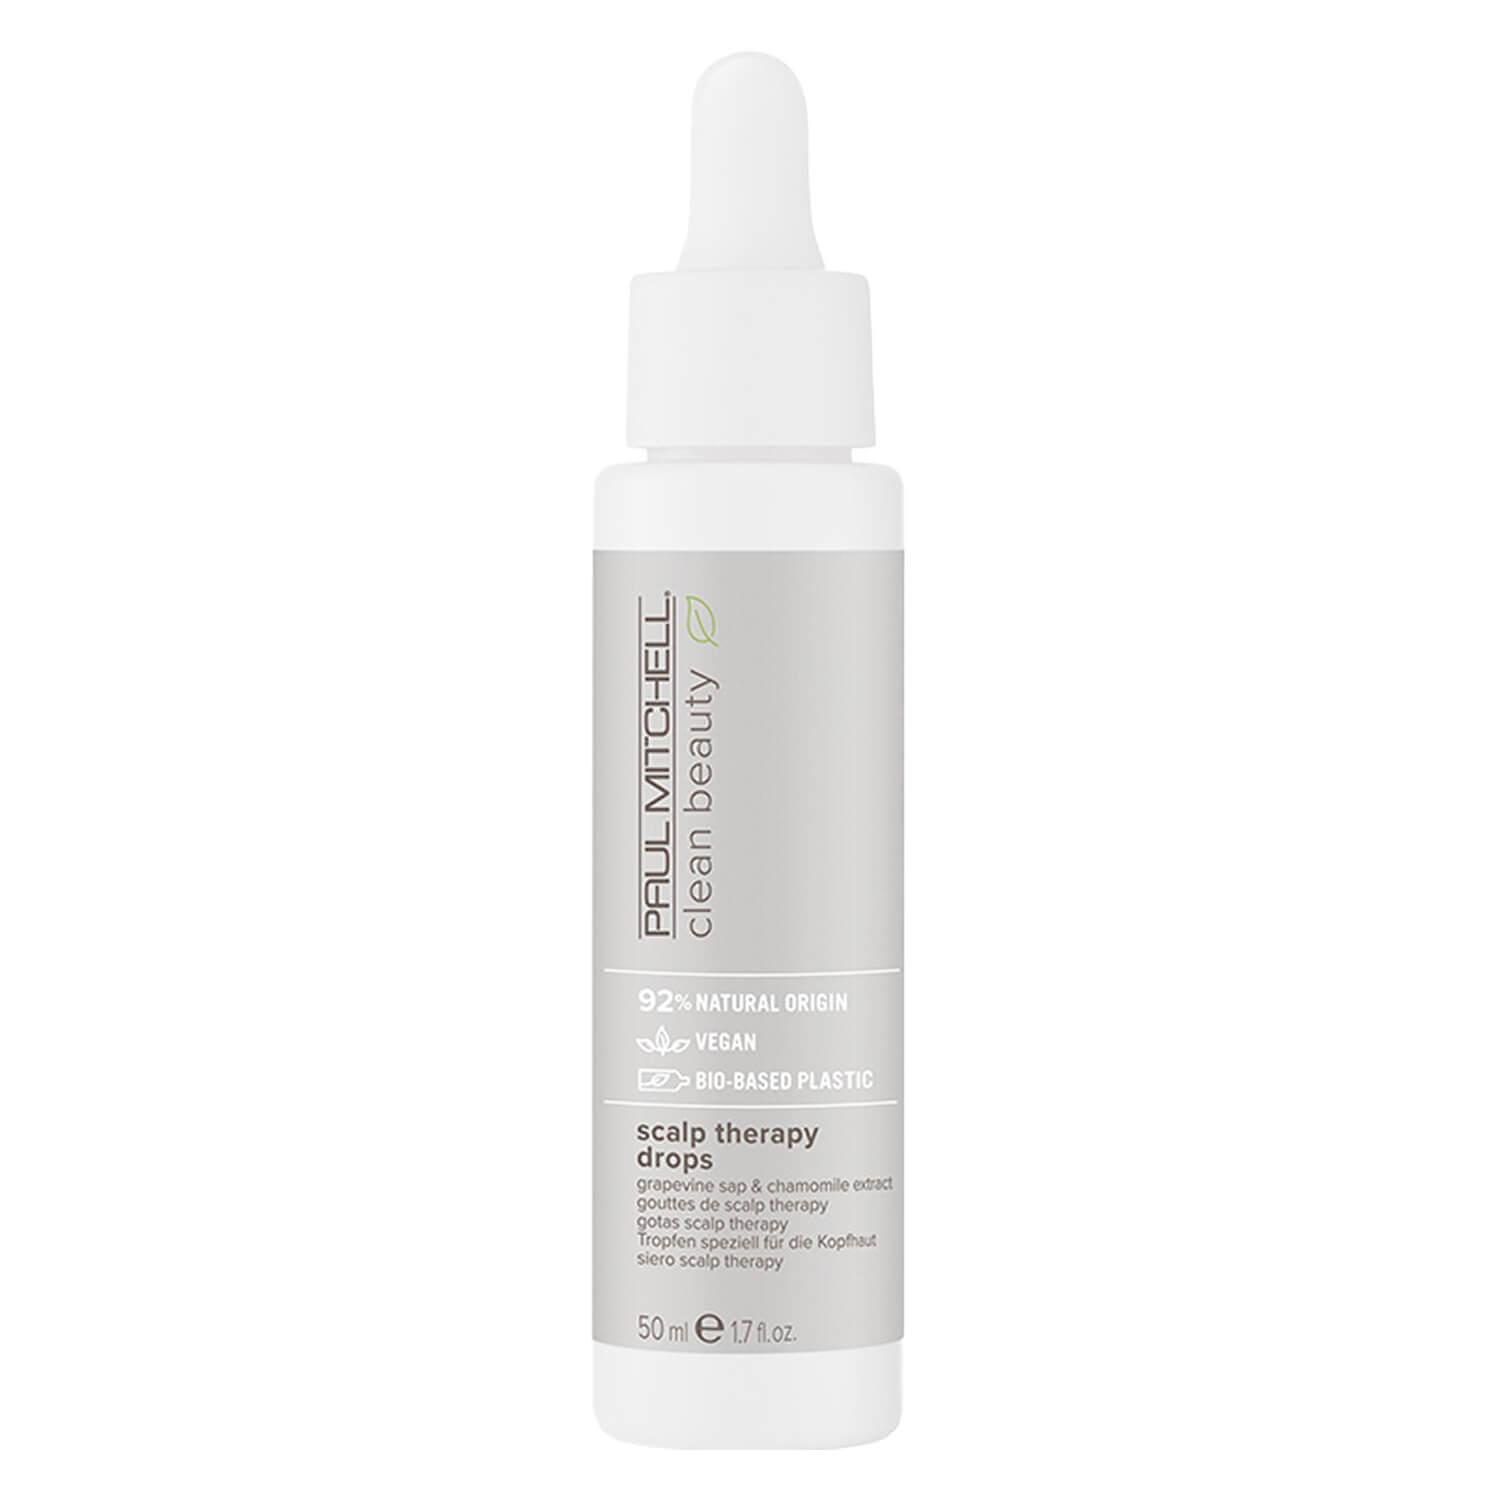 Paul Mitchell Clean Beauty - Scalp Therapy Drops